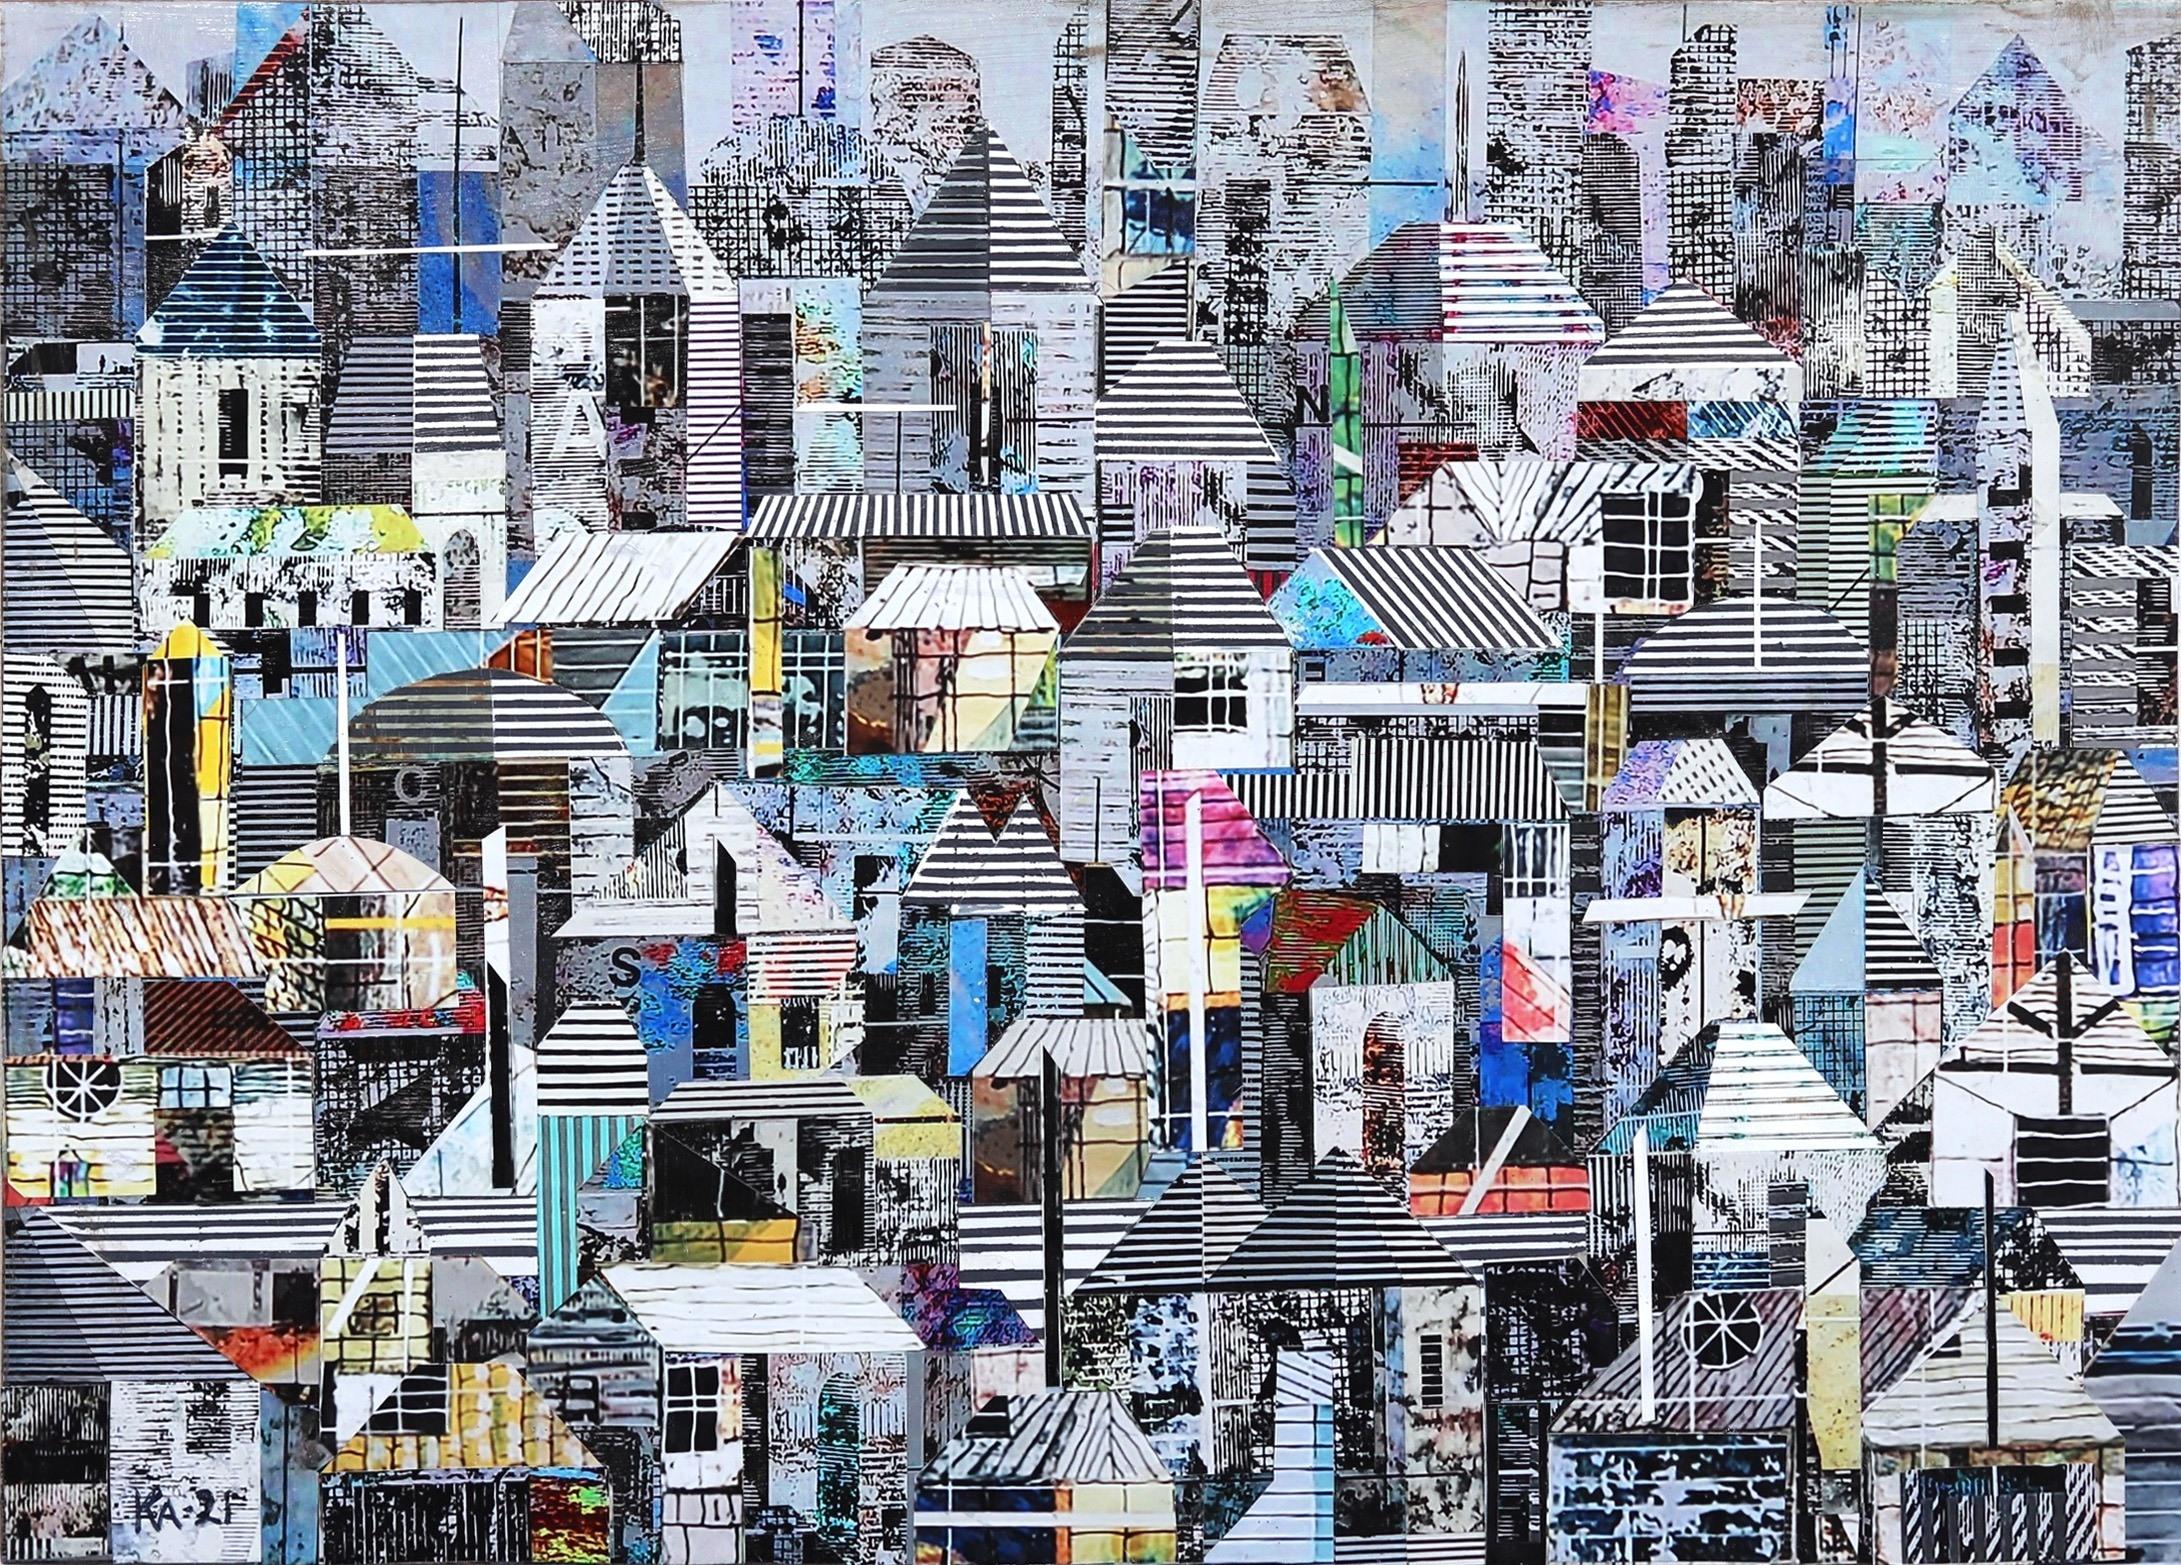 Tae Ho Kang Abstract Painting - Original Modern City Art Post-Impressionist Collage Painting - Sublime 2153